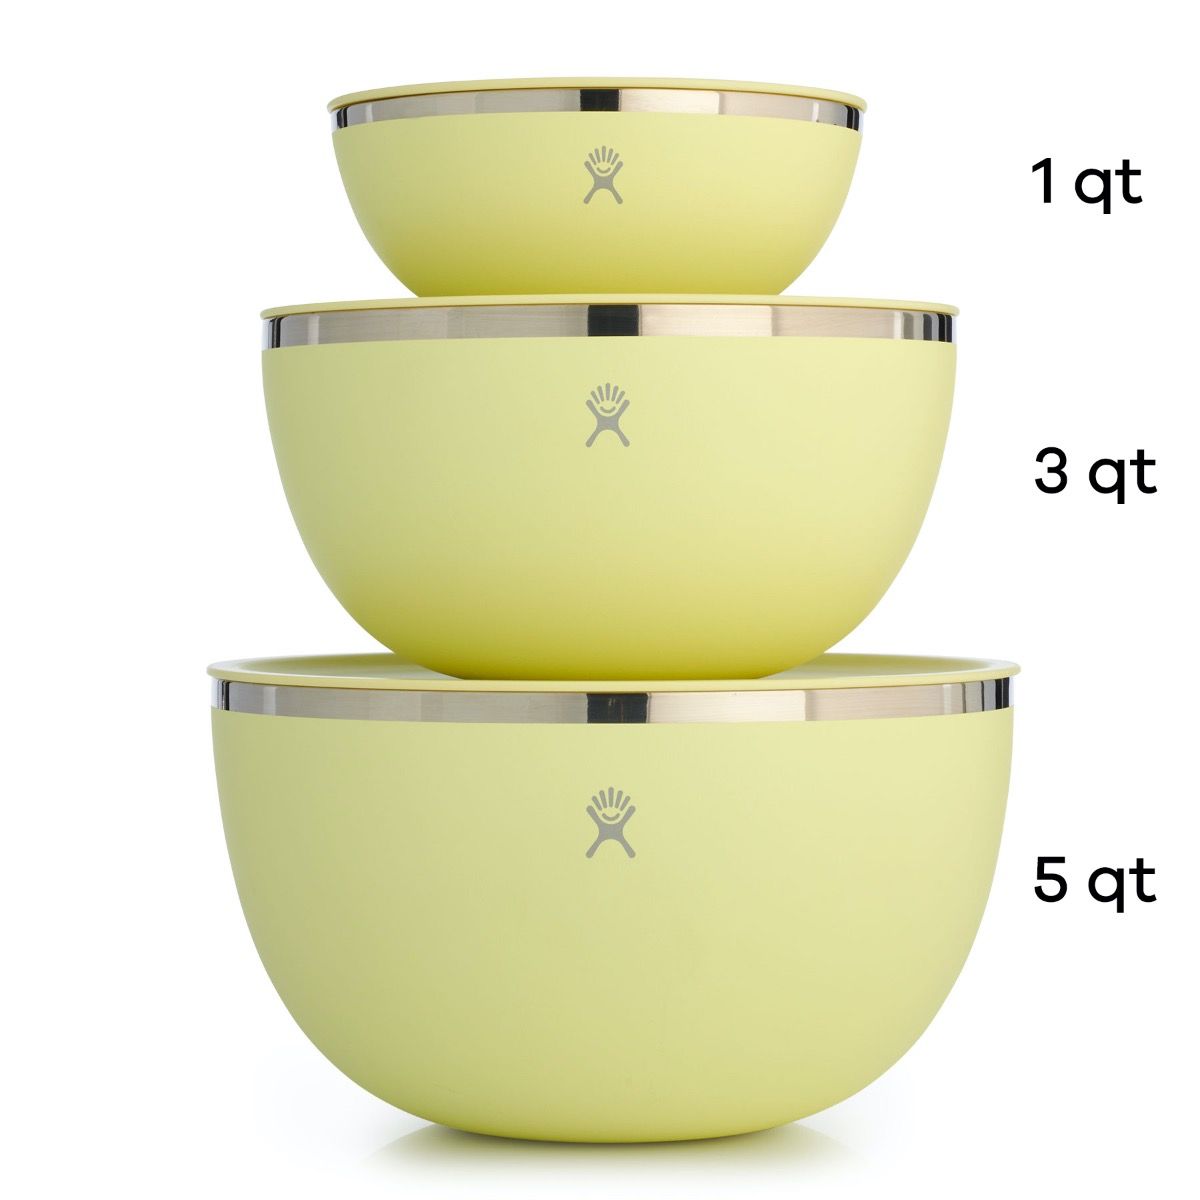 Hydro Flask 1qt Bowl with Lid